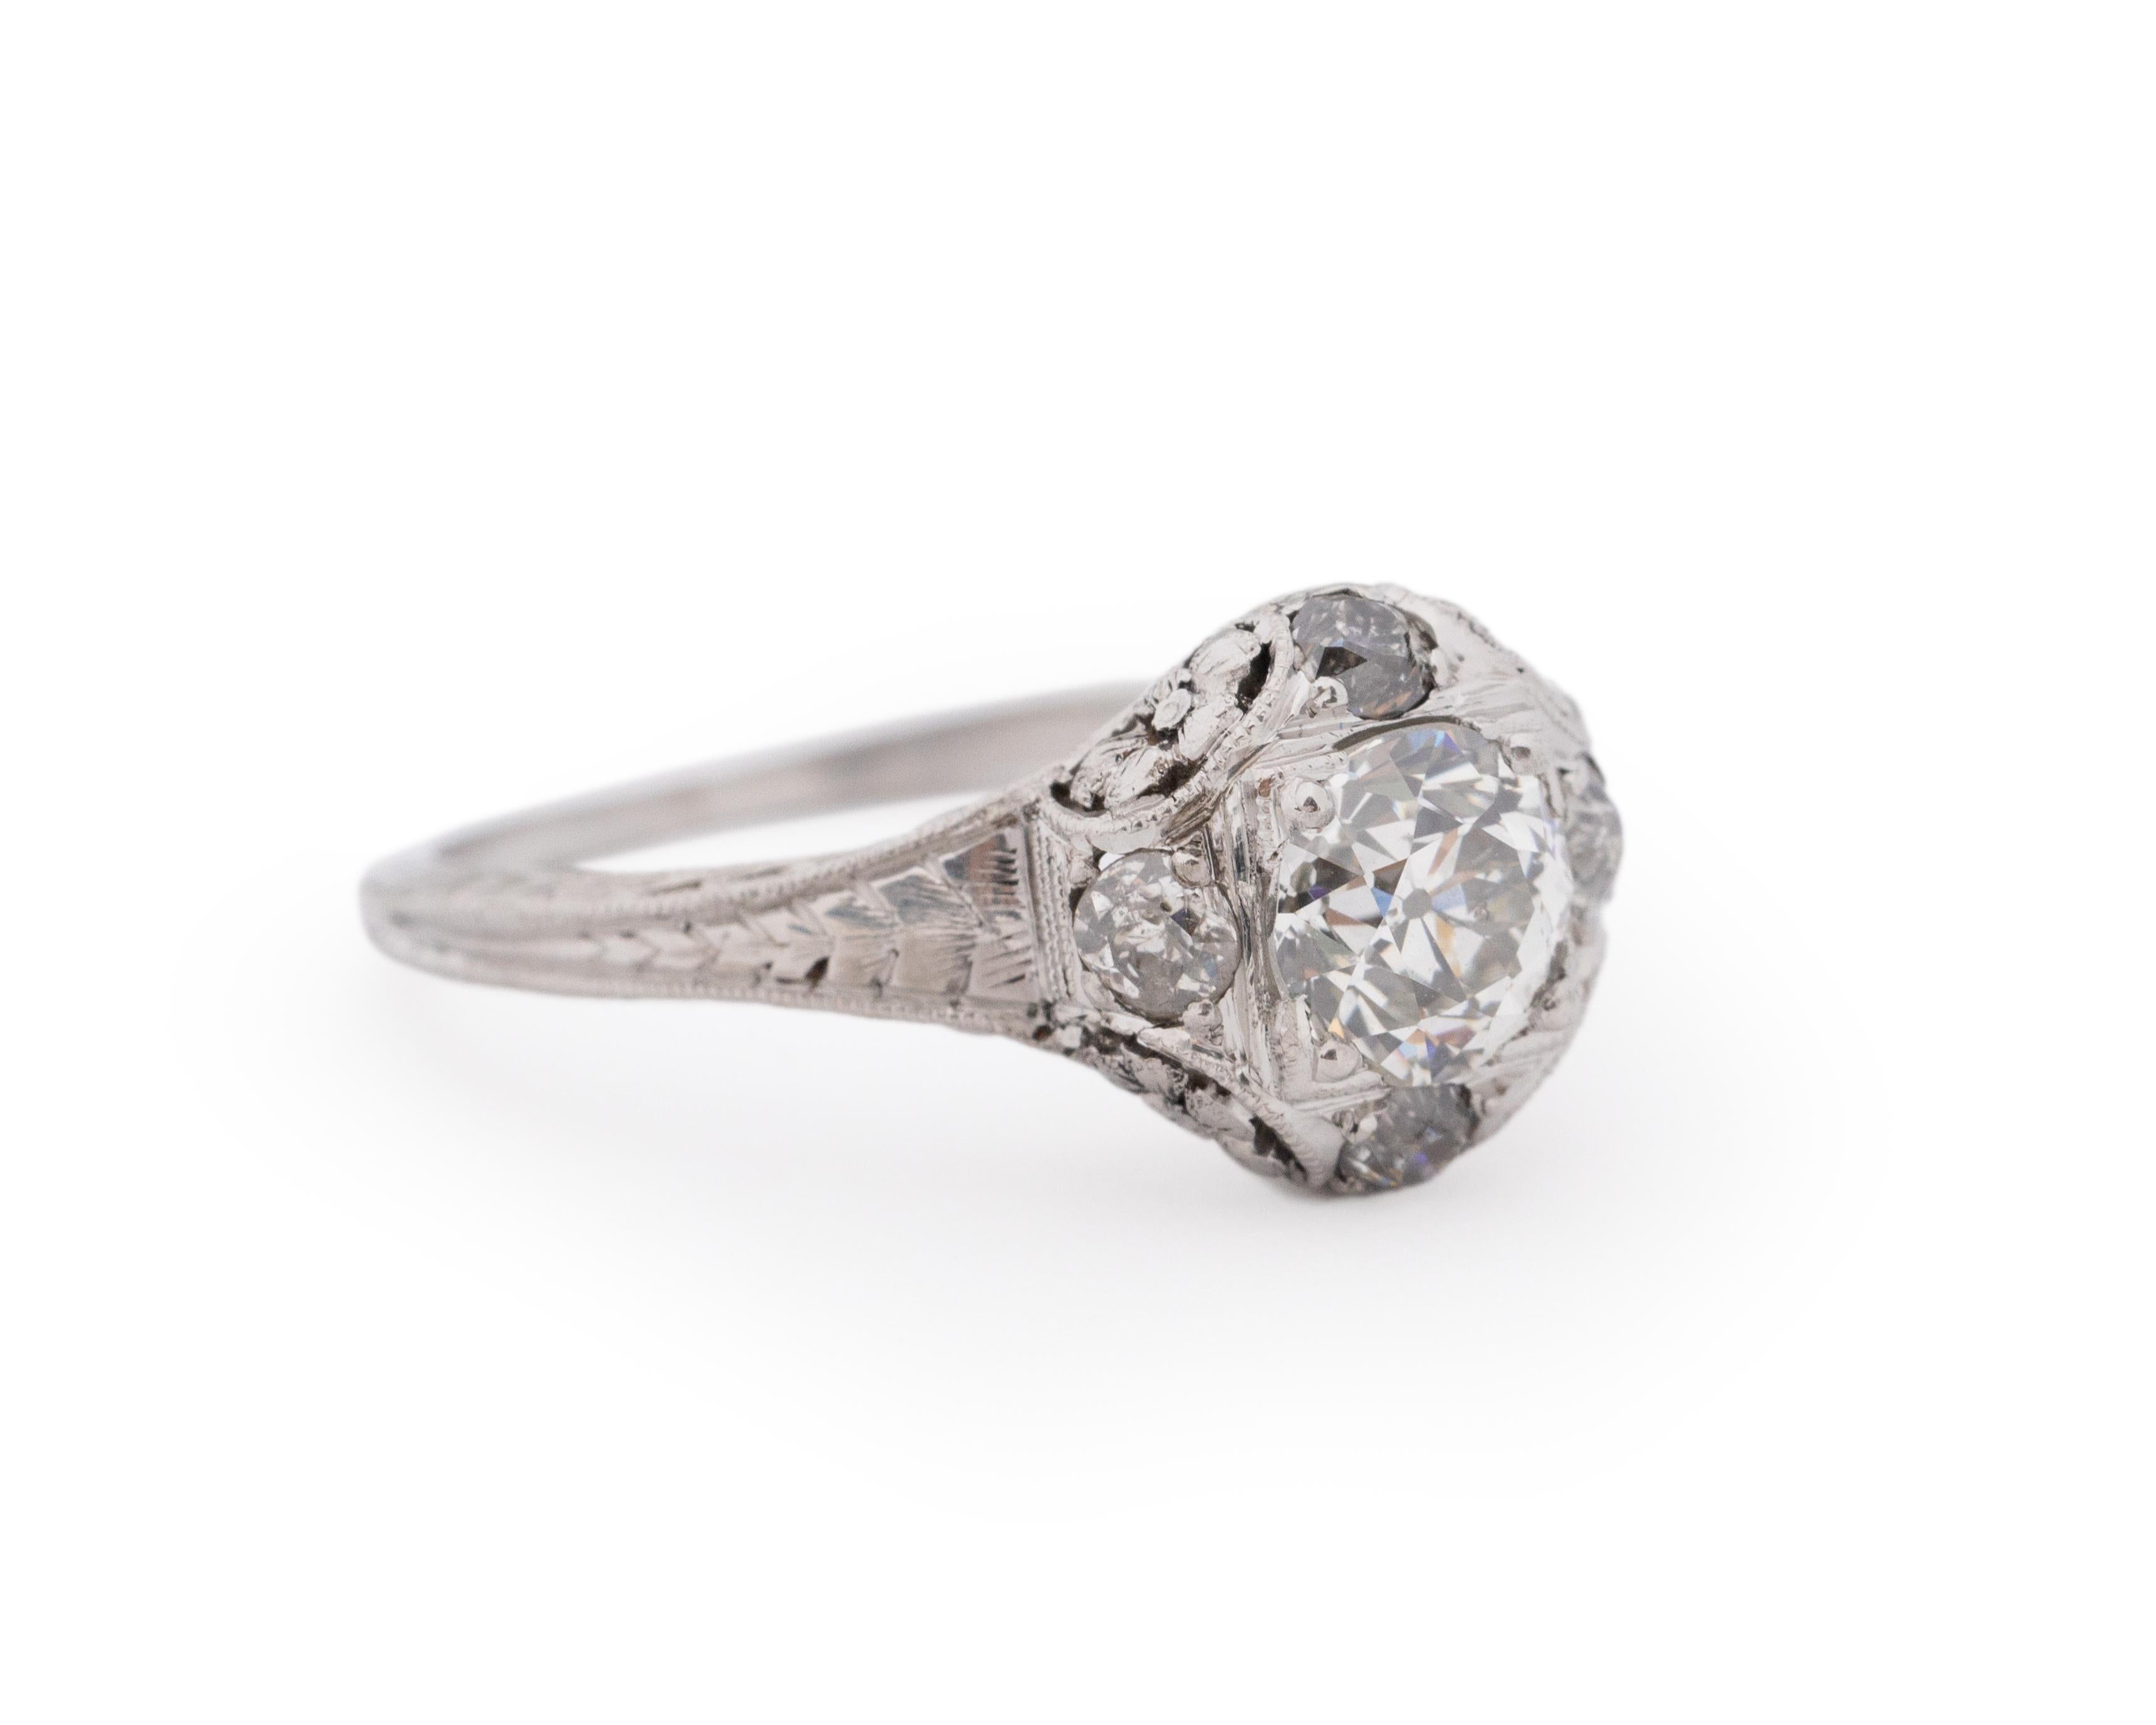 Year: 1920s

Item Details:
Ring Size: 5.25
Metal Type: Platinum [Hallmarked, and Tested]
Weight: 3.2 grams

Center Diamond Details:

GIA Report#: 2225947668
Weight: .68ct
Cut: Old European brilliant
Color: J
Clarity: SI2
Type: Natural

Side Diamond